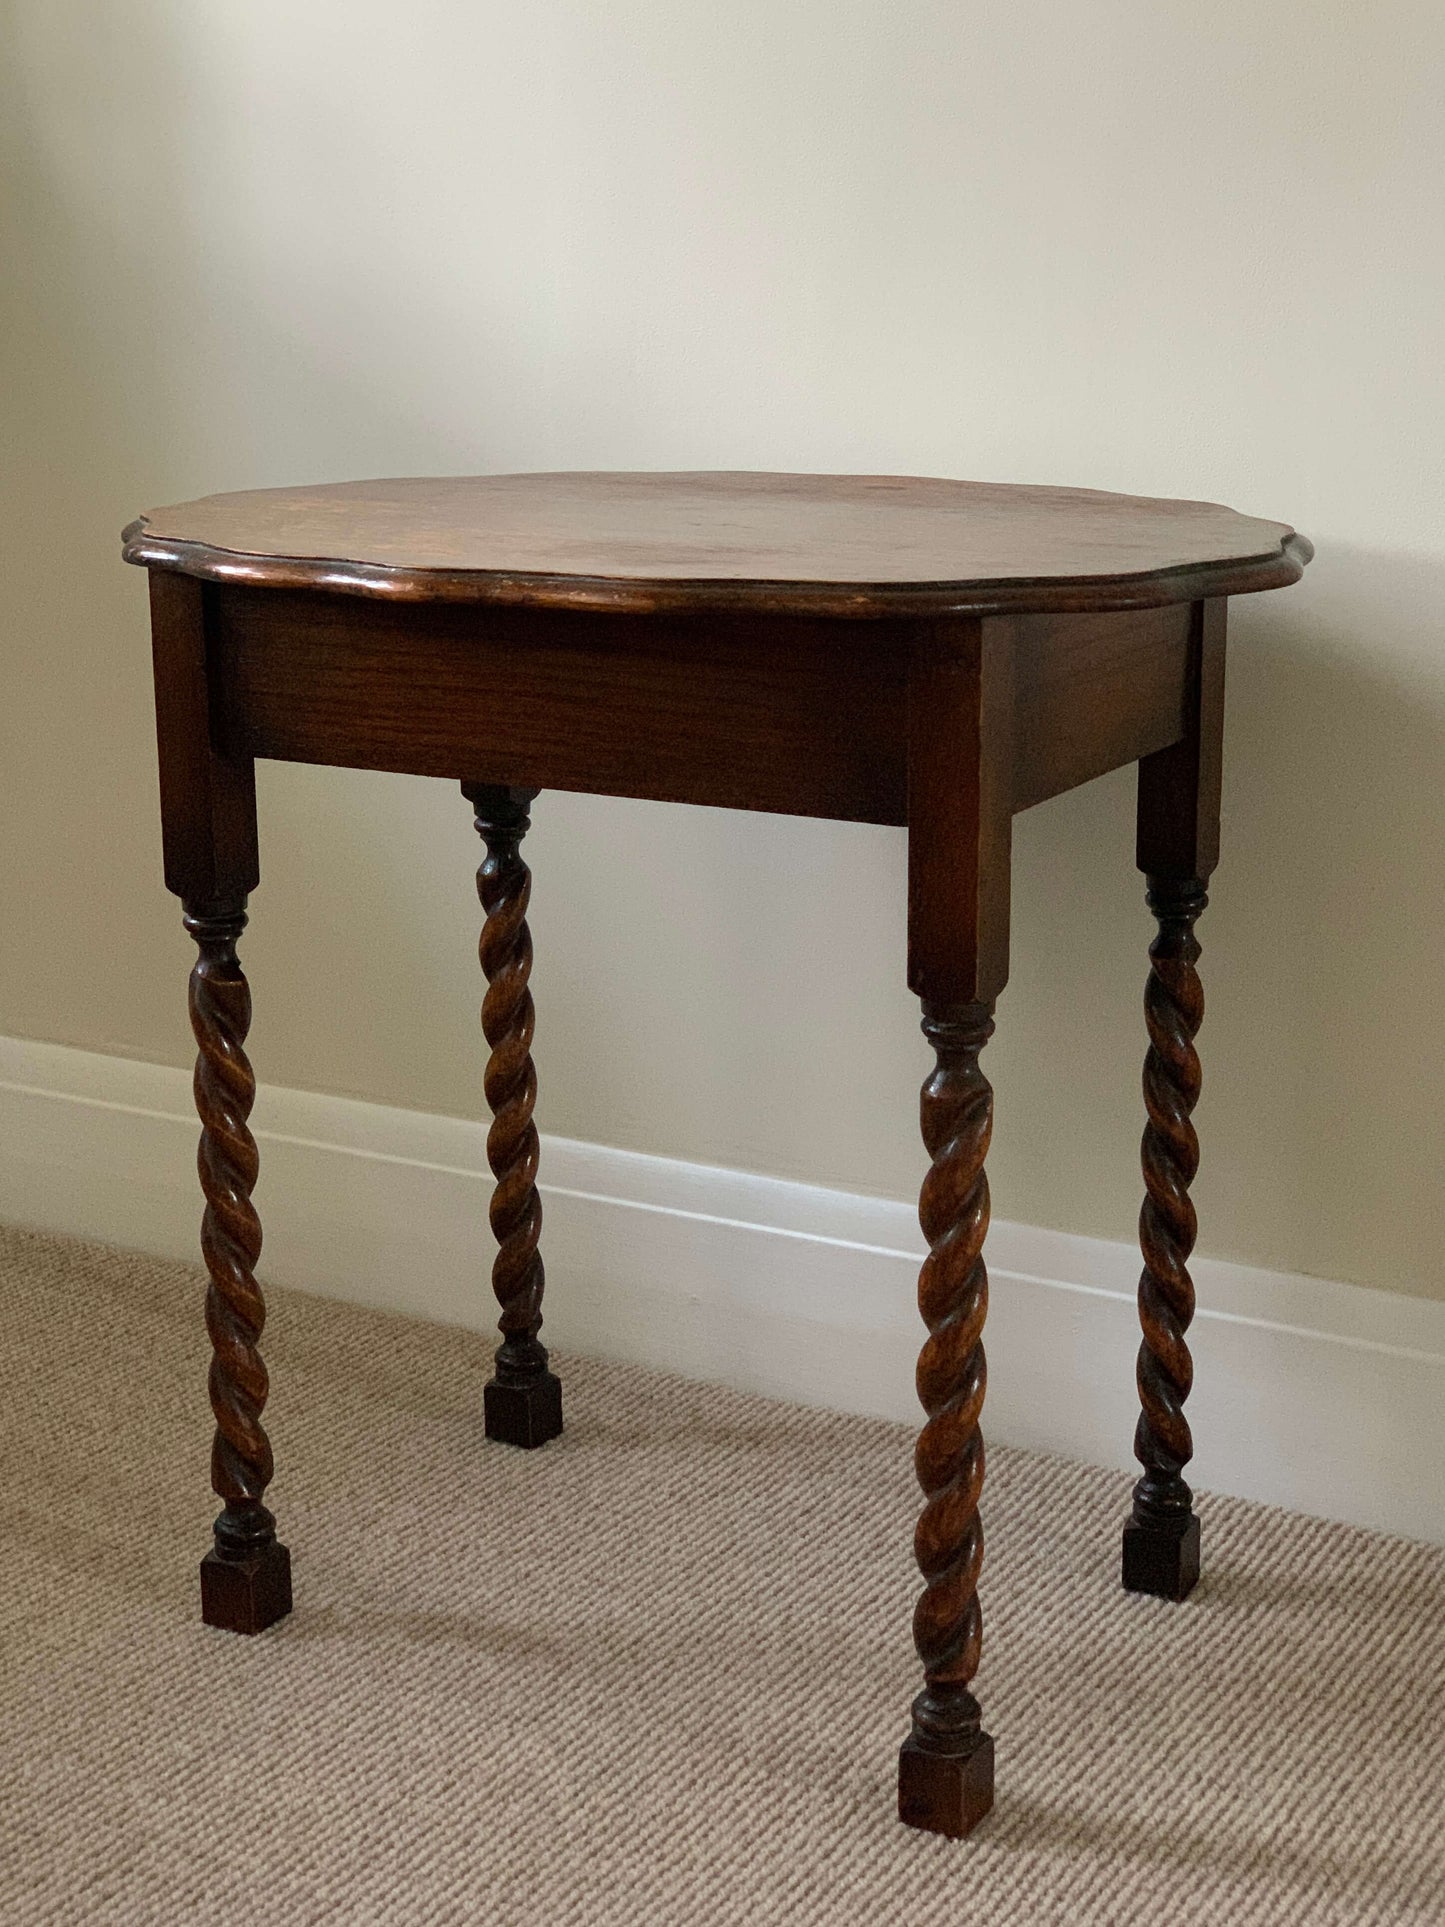 Antique scalloped barley twist side table